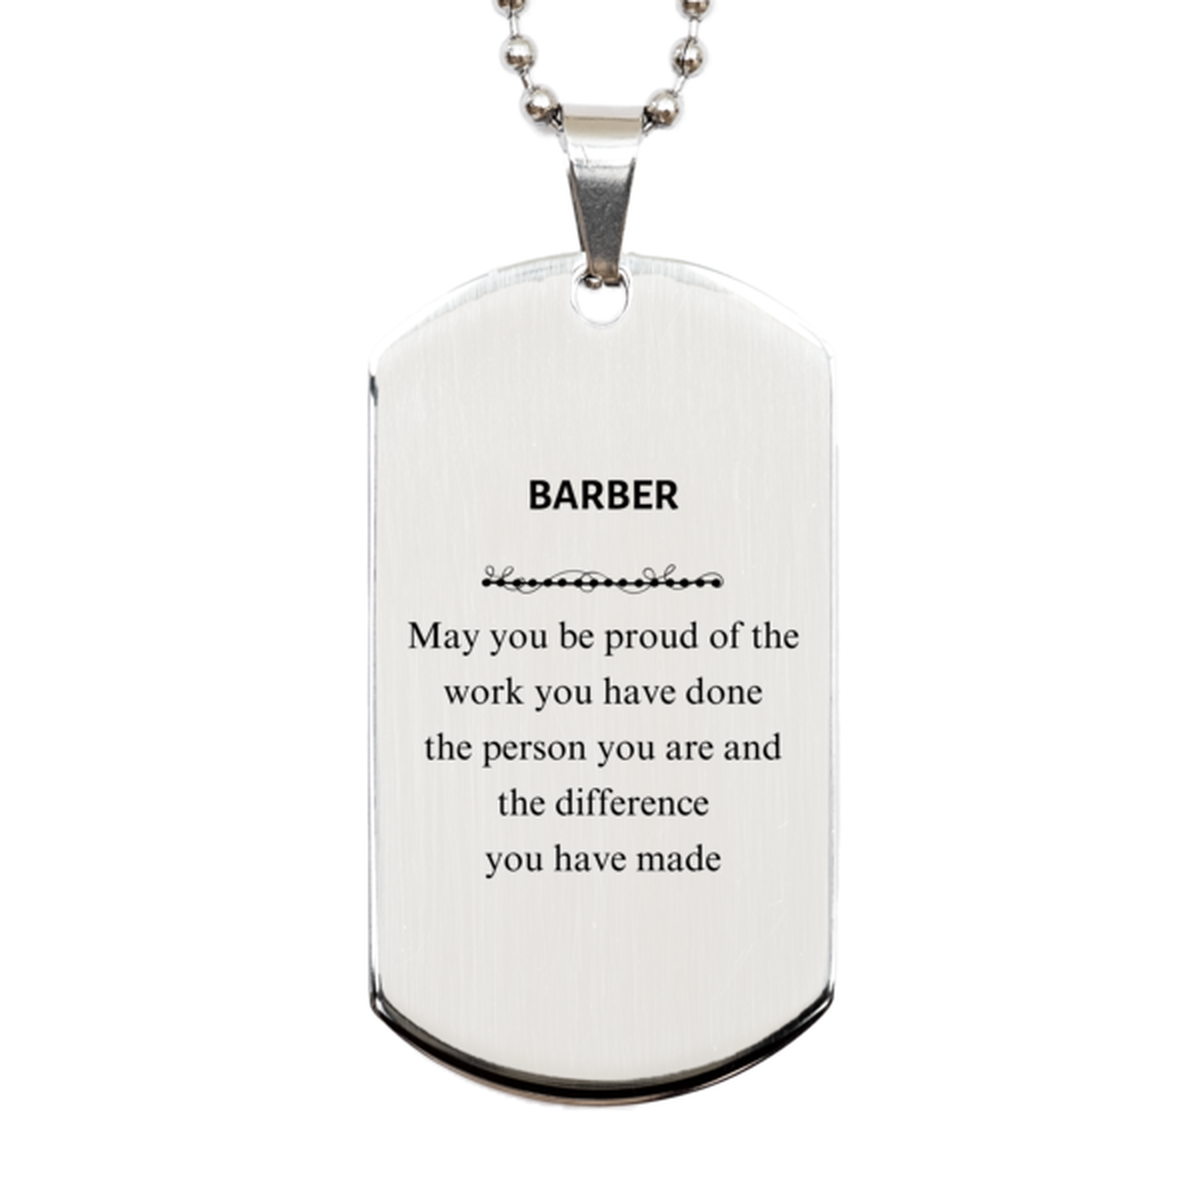 Barber May you be proud of the work you have done, Retirement Barber Silver Dog Tag for Colleague Appreciation Gifts Amazing for Barber